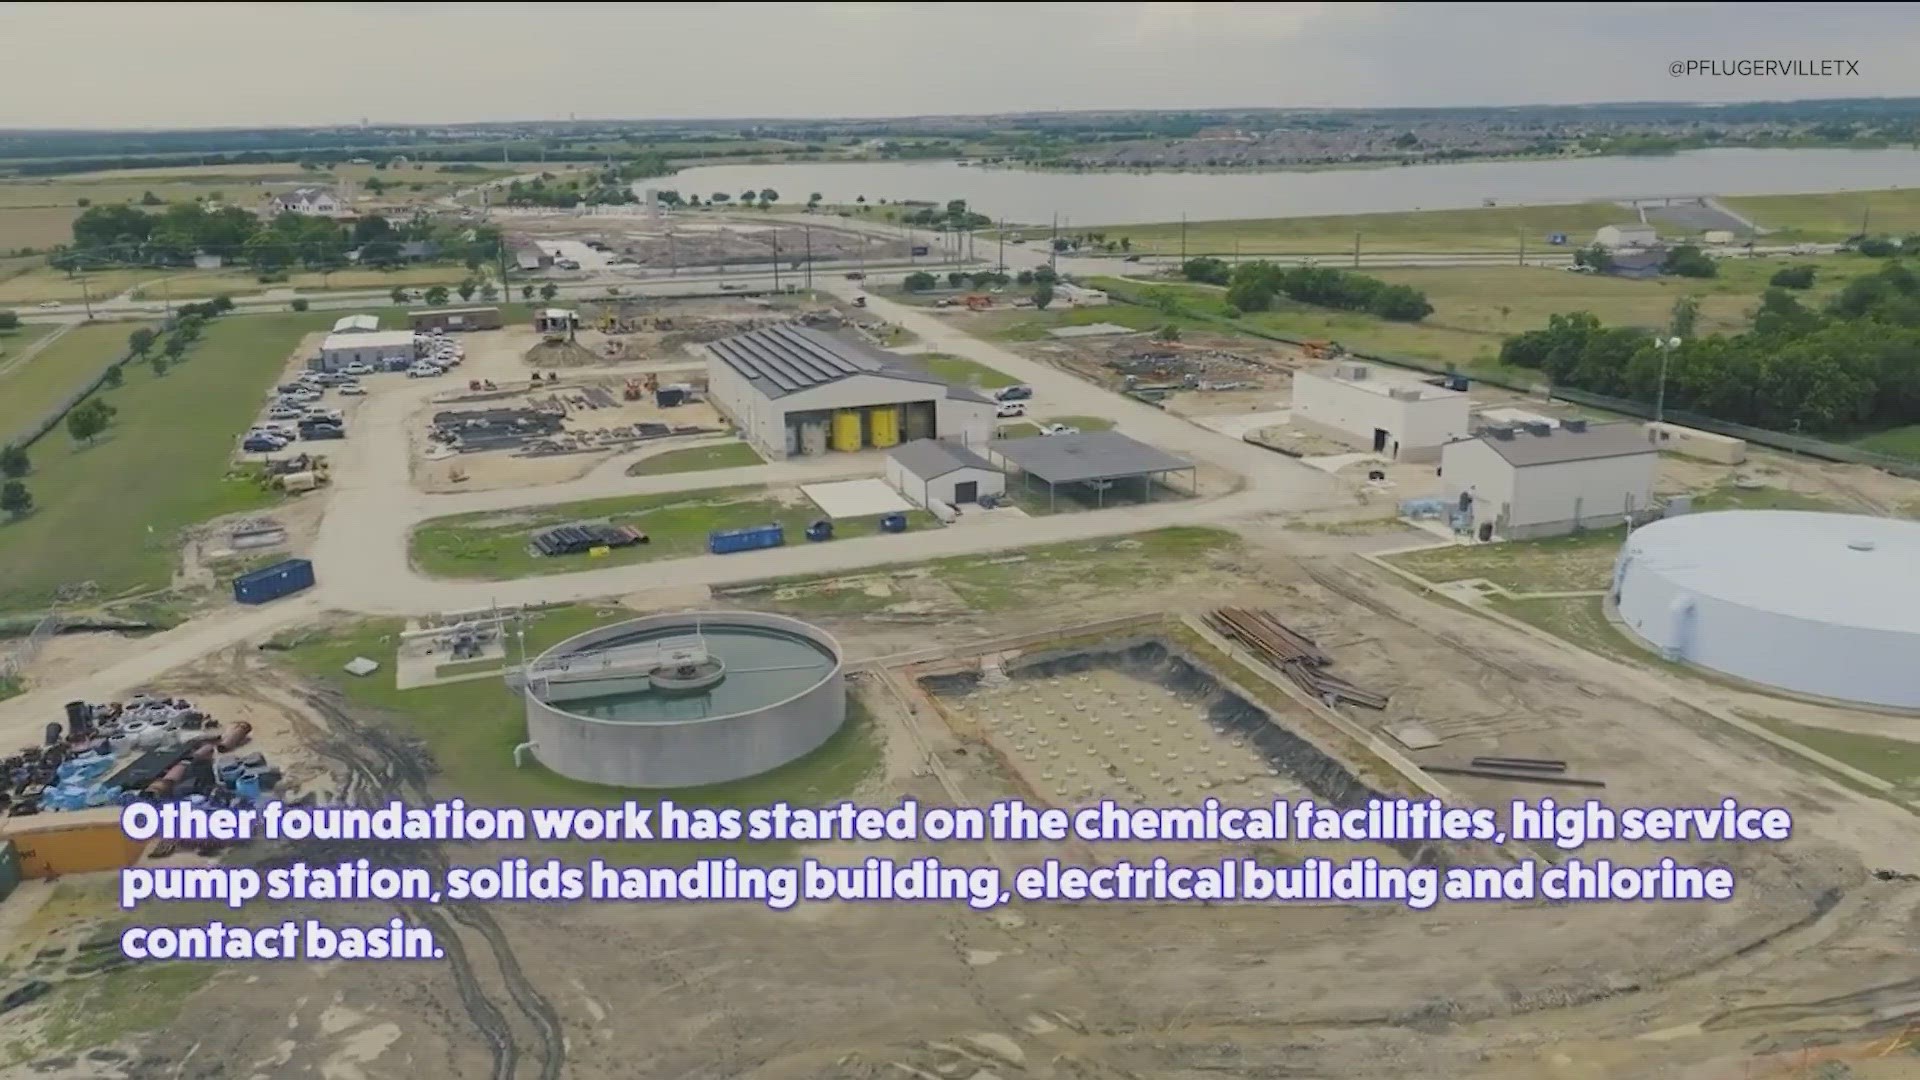 The plant is expected to increase Pflugerville's drinking water system's capacity to meet demand.